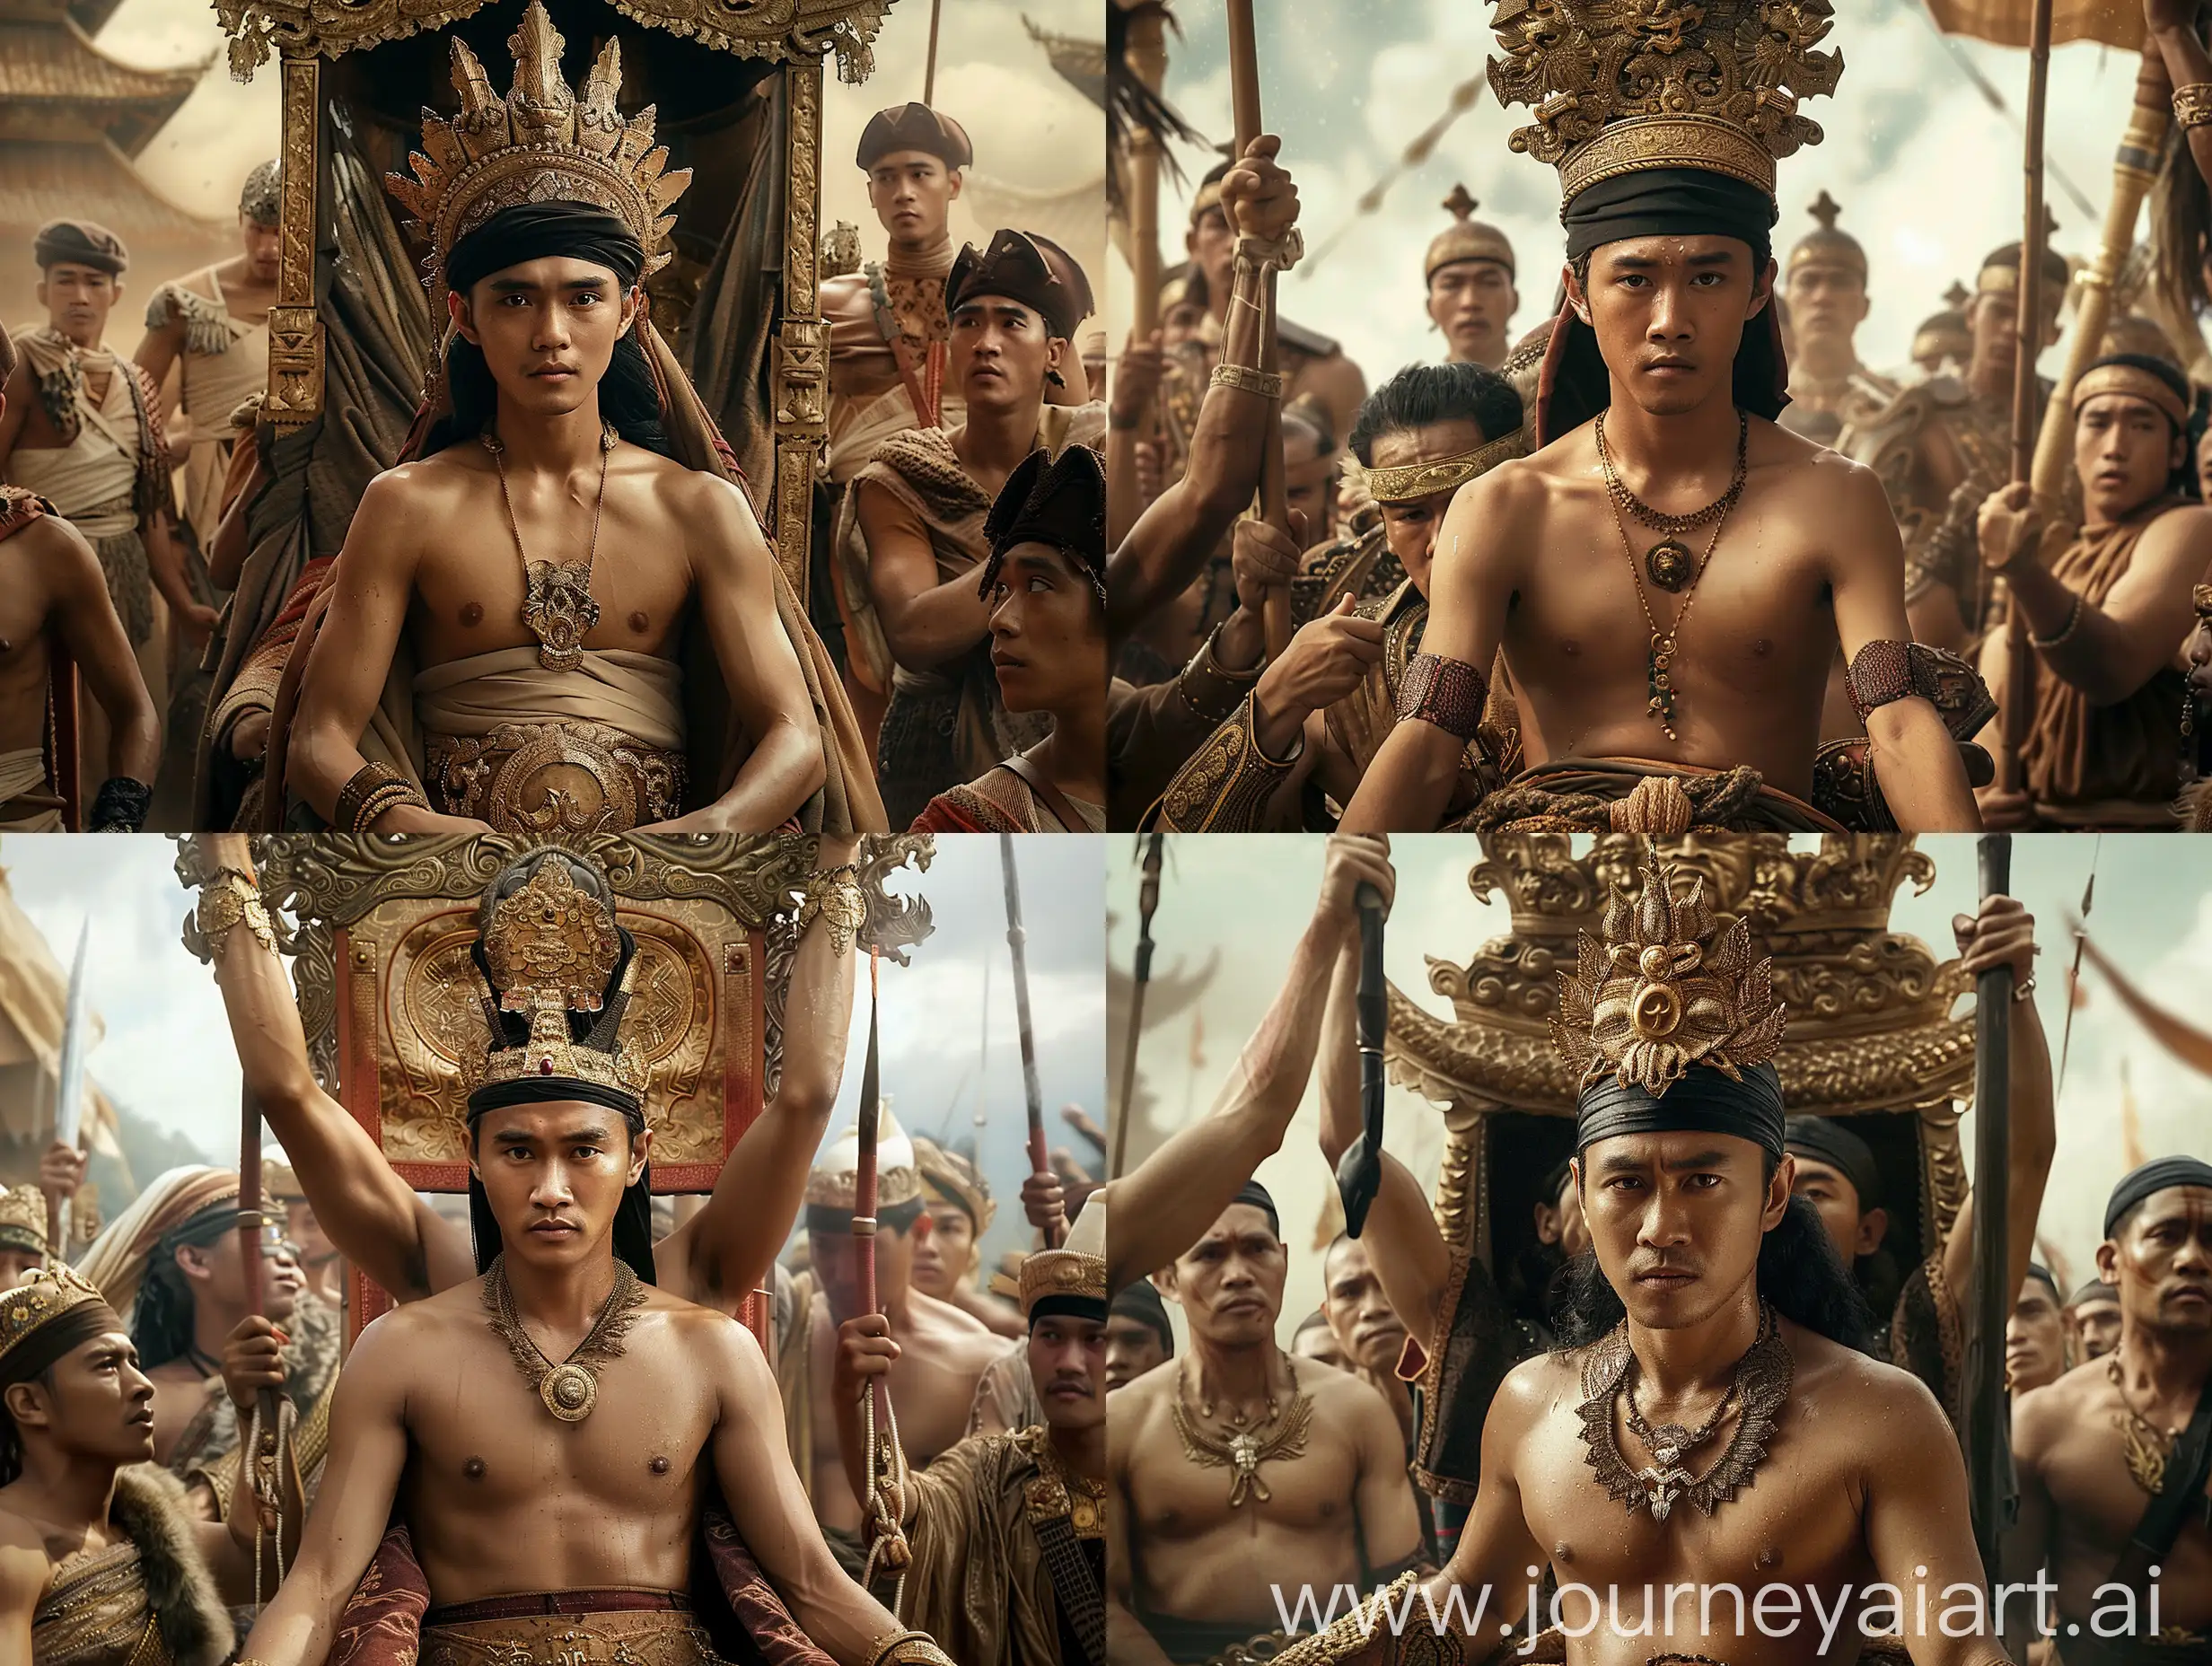 Cinematic movie, Indonesian kingdom of Pajajaran, Dyah pitaloka, 30 years old, sitting in a Palanquin royal palanquin being lifted by his troops, his troops, dressed in war clothes, without a shirt, wearing a black cloth headband,,super realistic, nice detail, --v 6 --ar 16:9